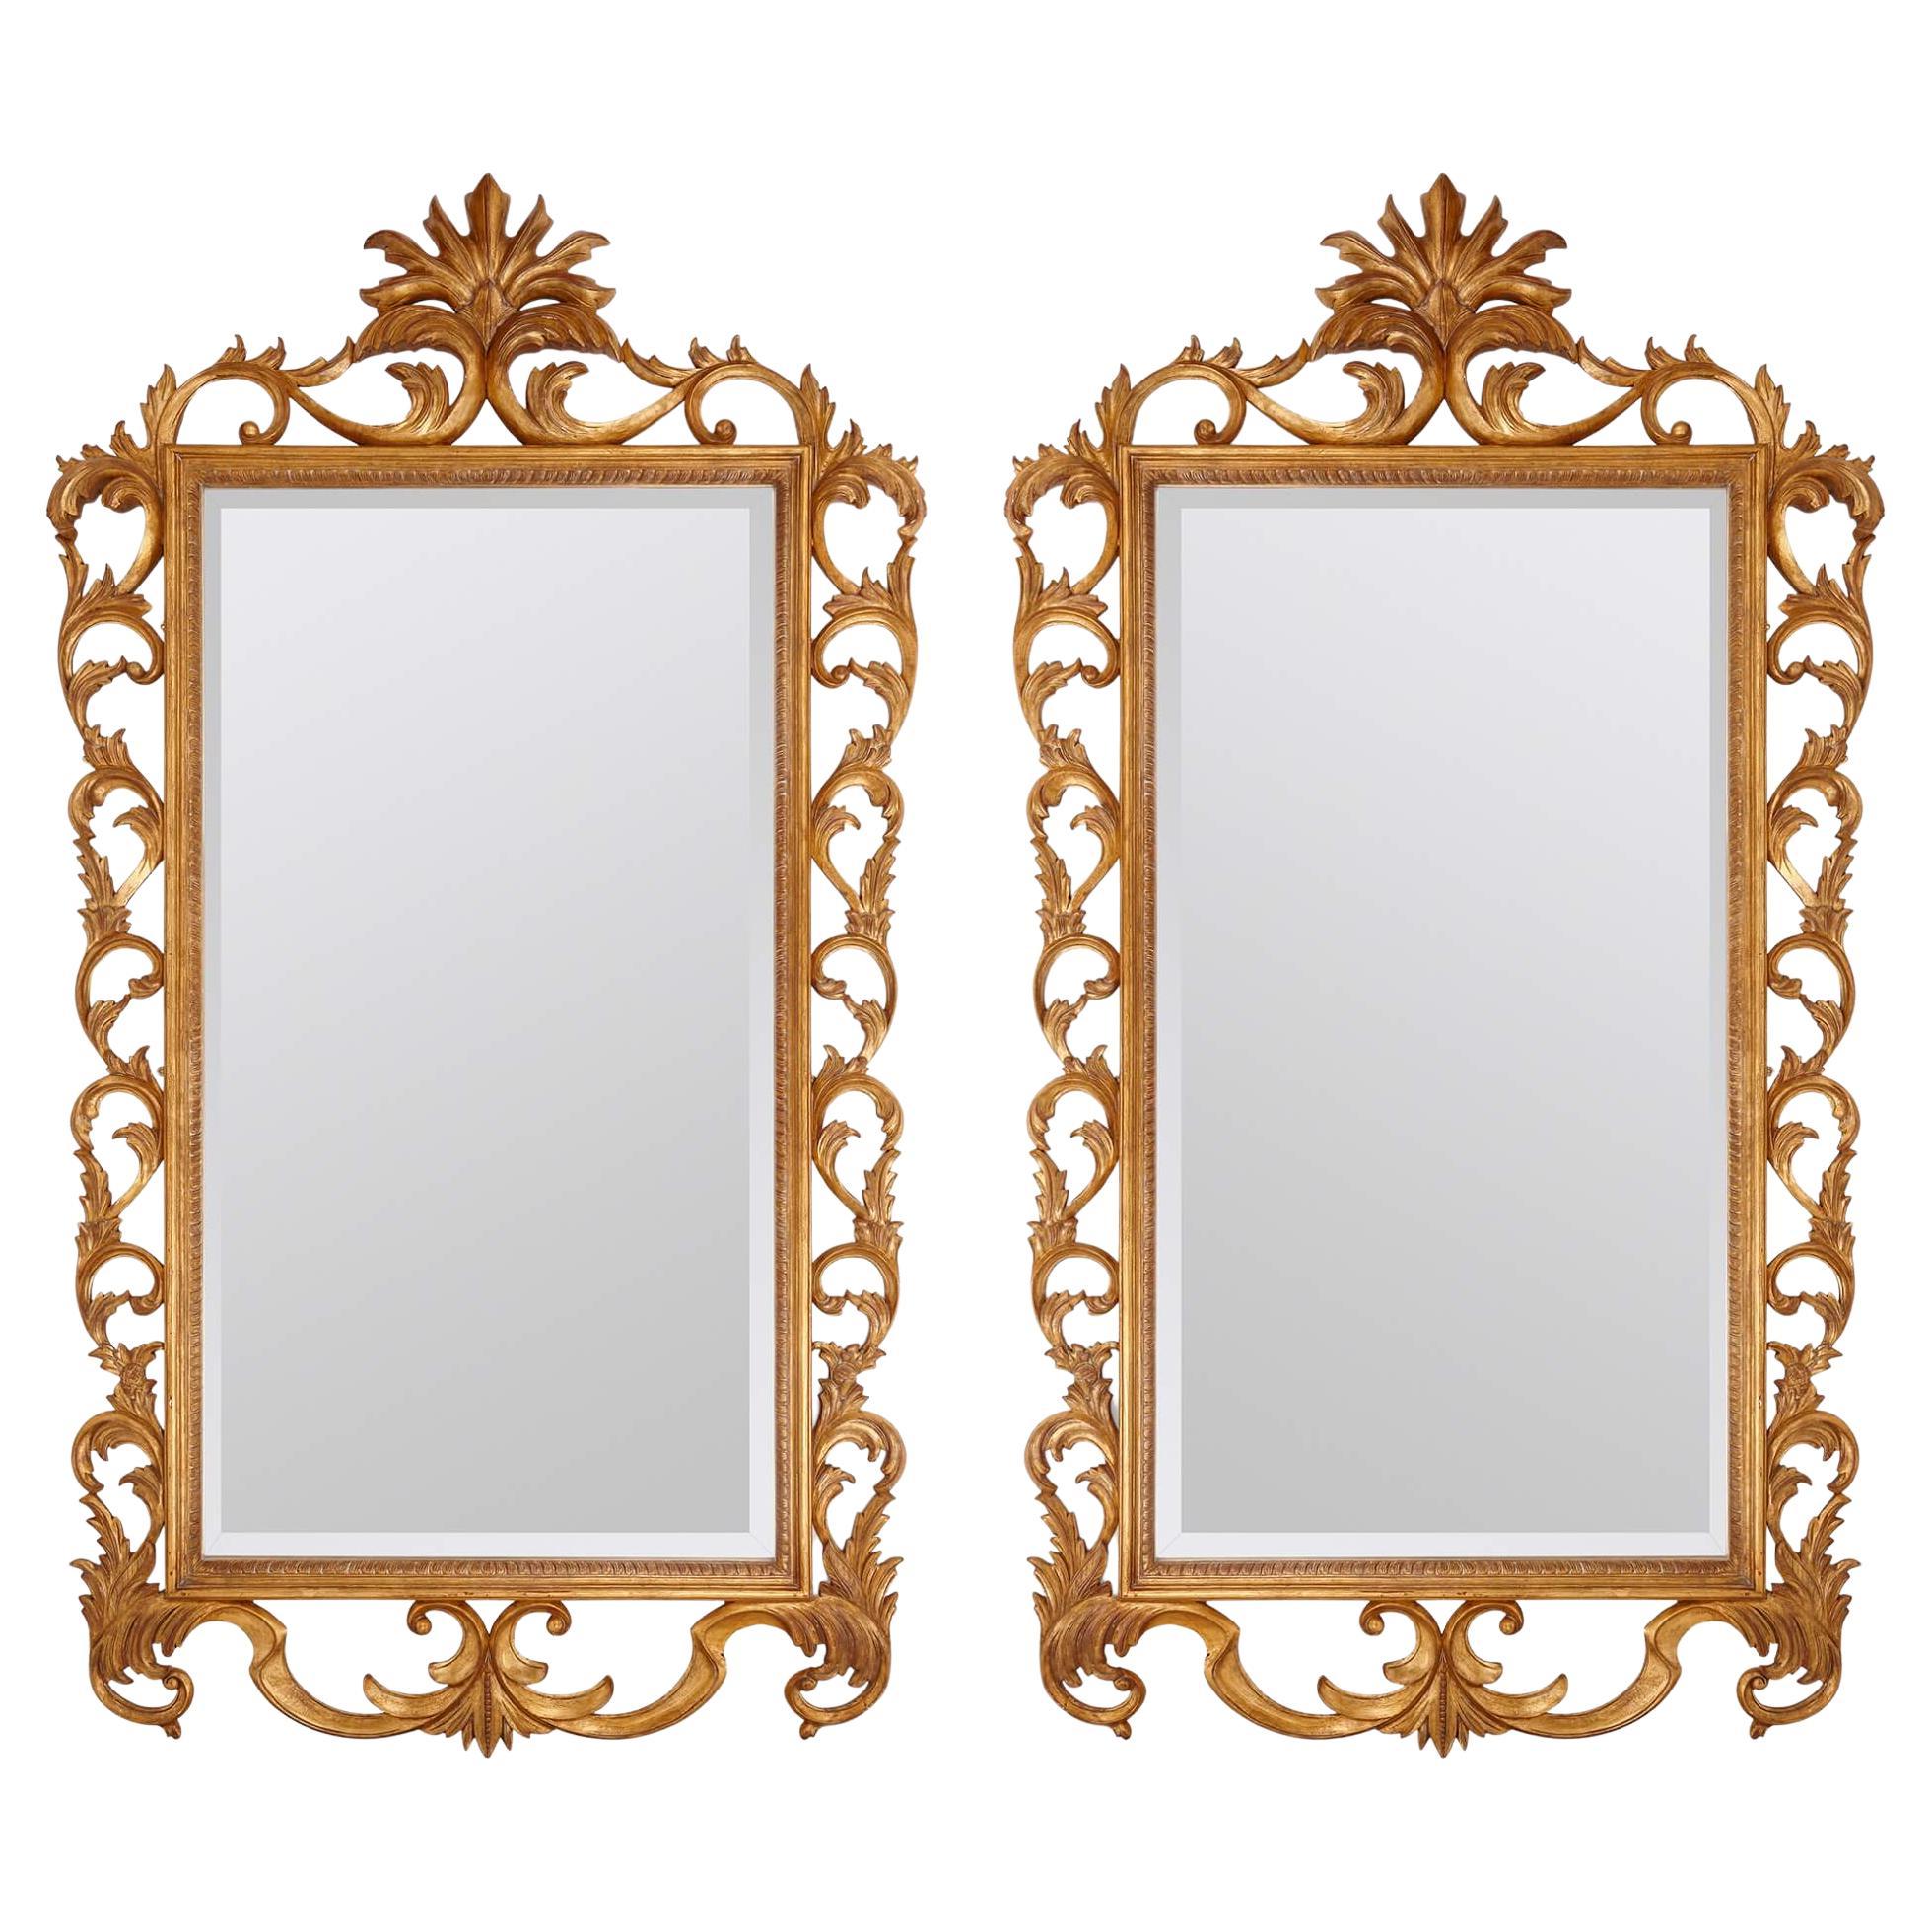 Pair of Very Large French Giltwood Mirrors with Scrolled Acanthus Borders